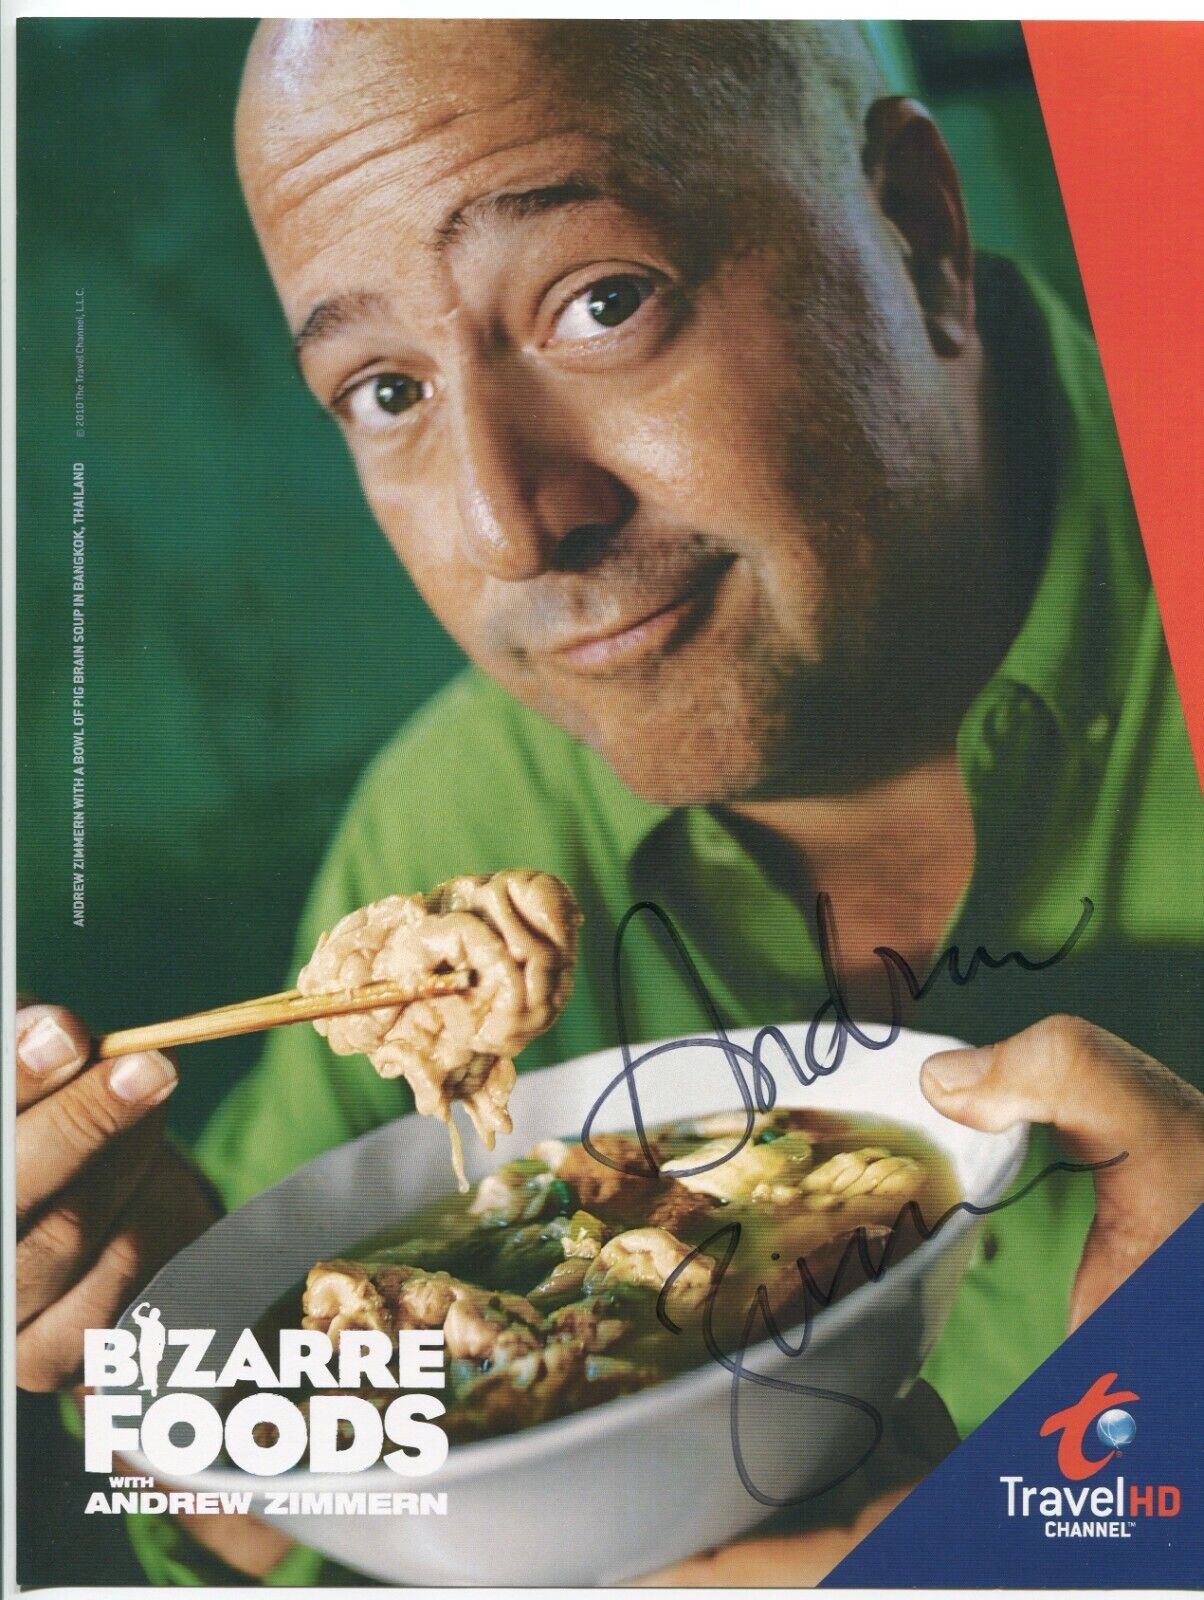 Andrew Zimmern Signed Photo Poster painting Autographed Signature Critic Bizarre Foods Chef